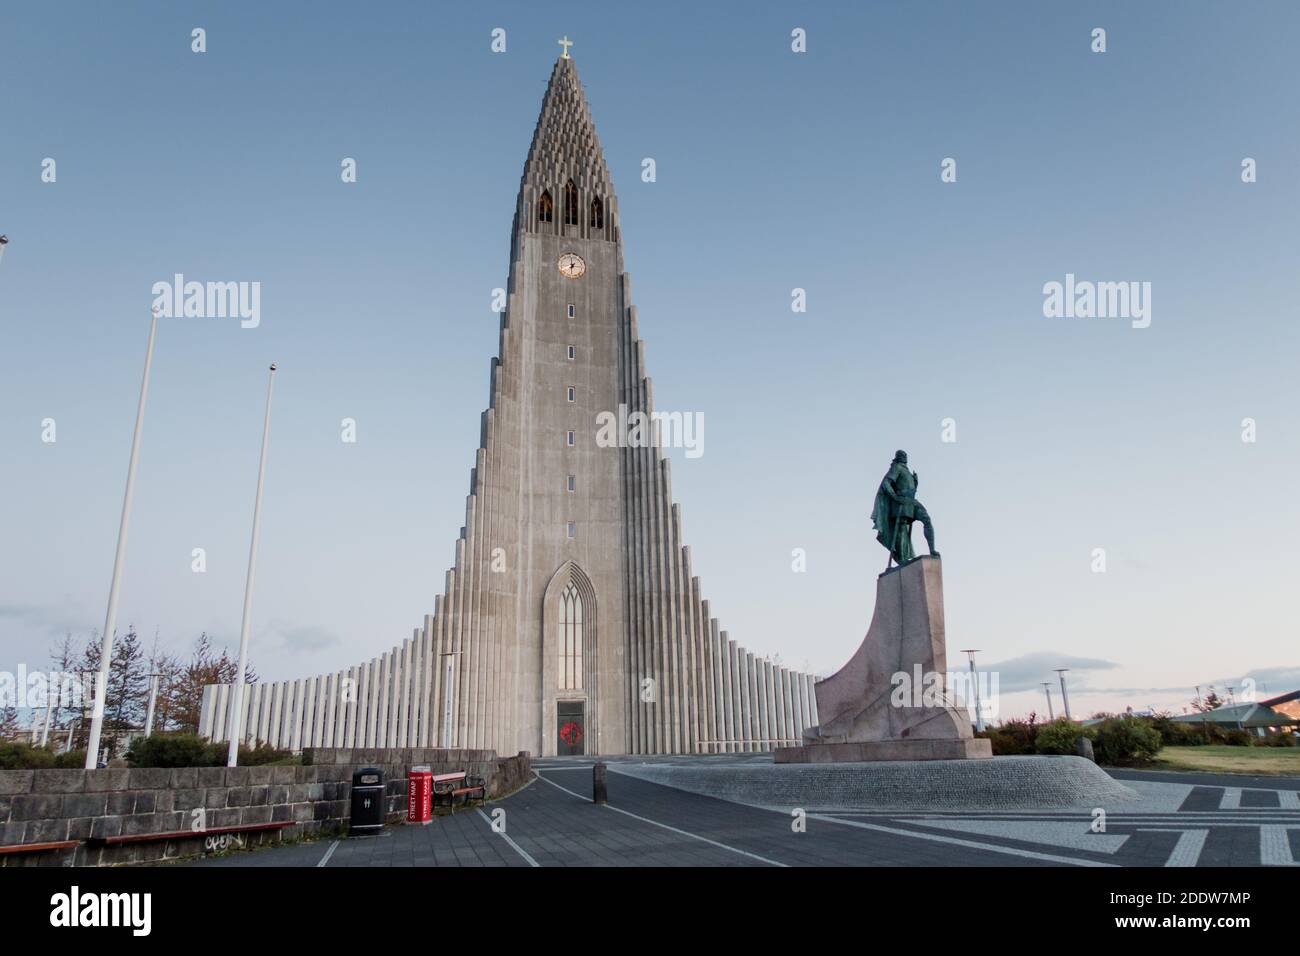 The famous church and tourist attraction Hallgrímskirkja located in downtown Reykjavík, taken at dusk with a clear blue evening sky and lights. Stock Photo